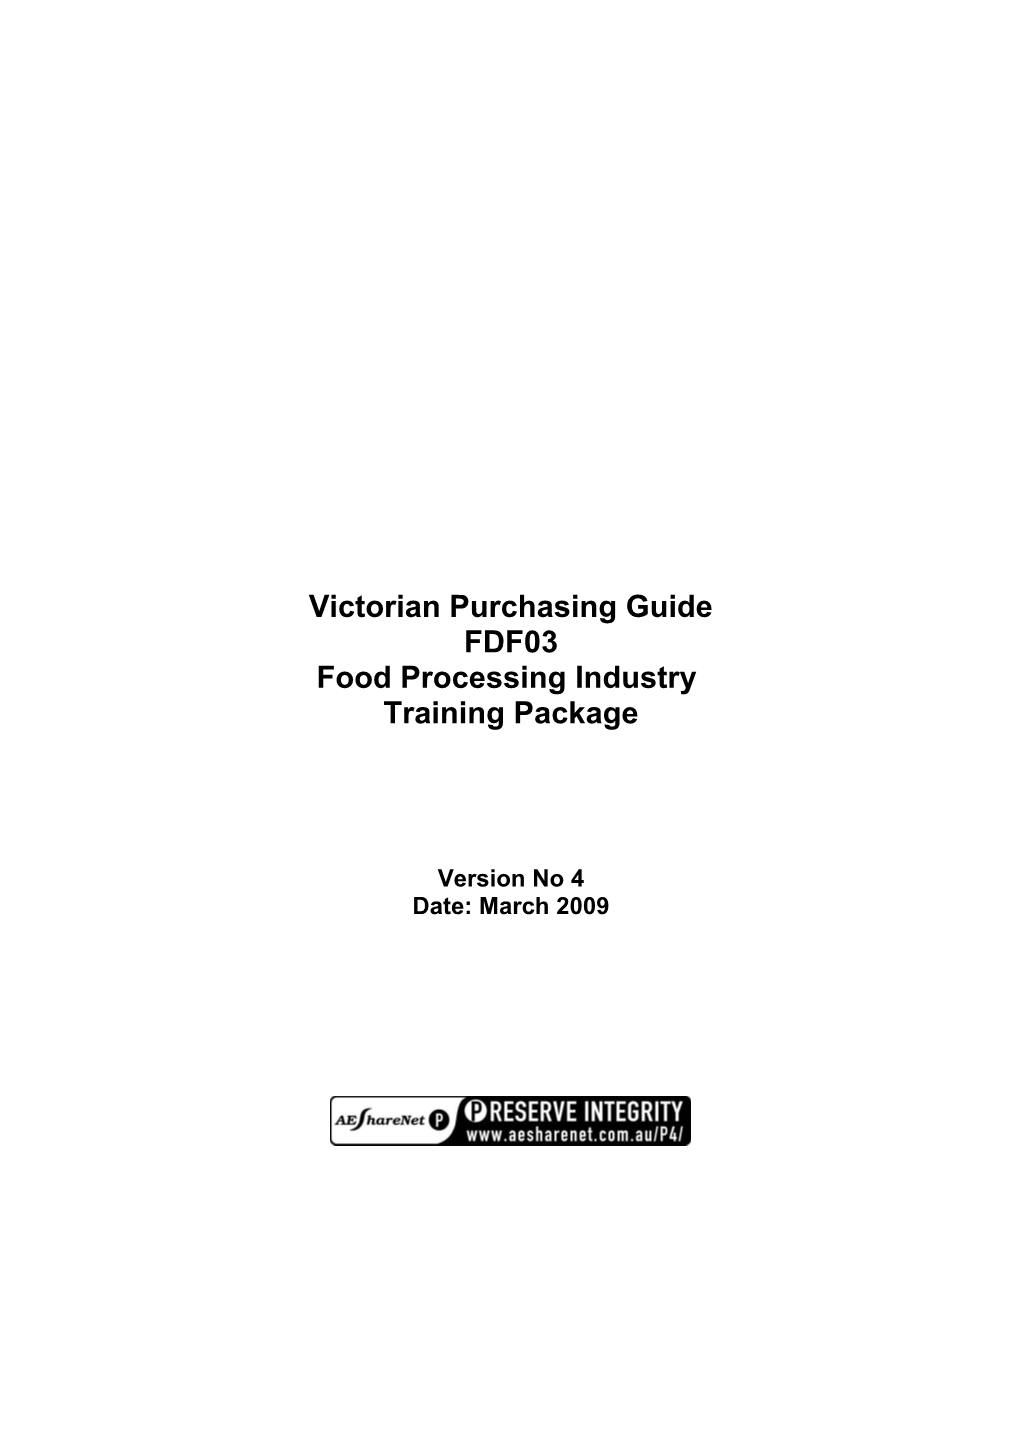 Victorian Purchasing Guide for FDF03 Food Processing Version 4